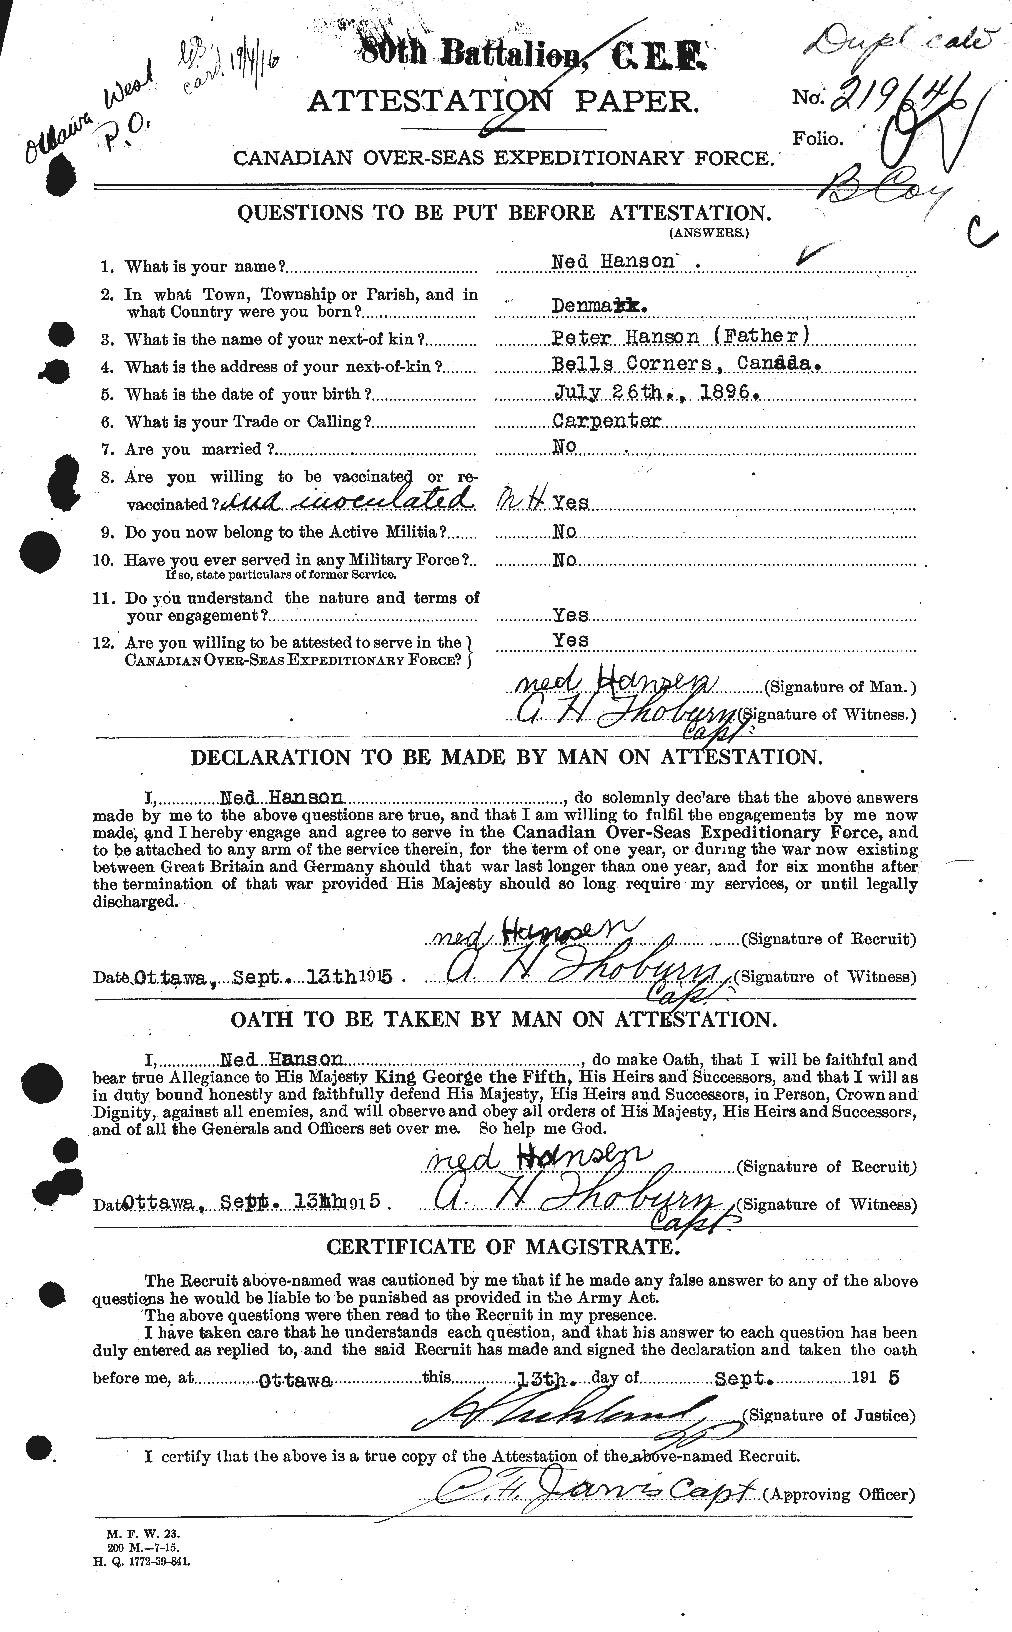 Personnel Records of the First World War - CEF 375982a